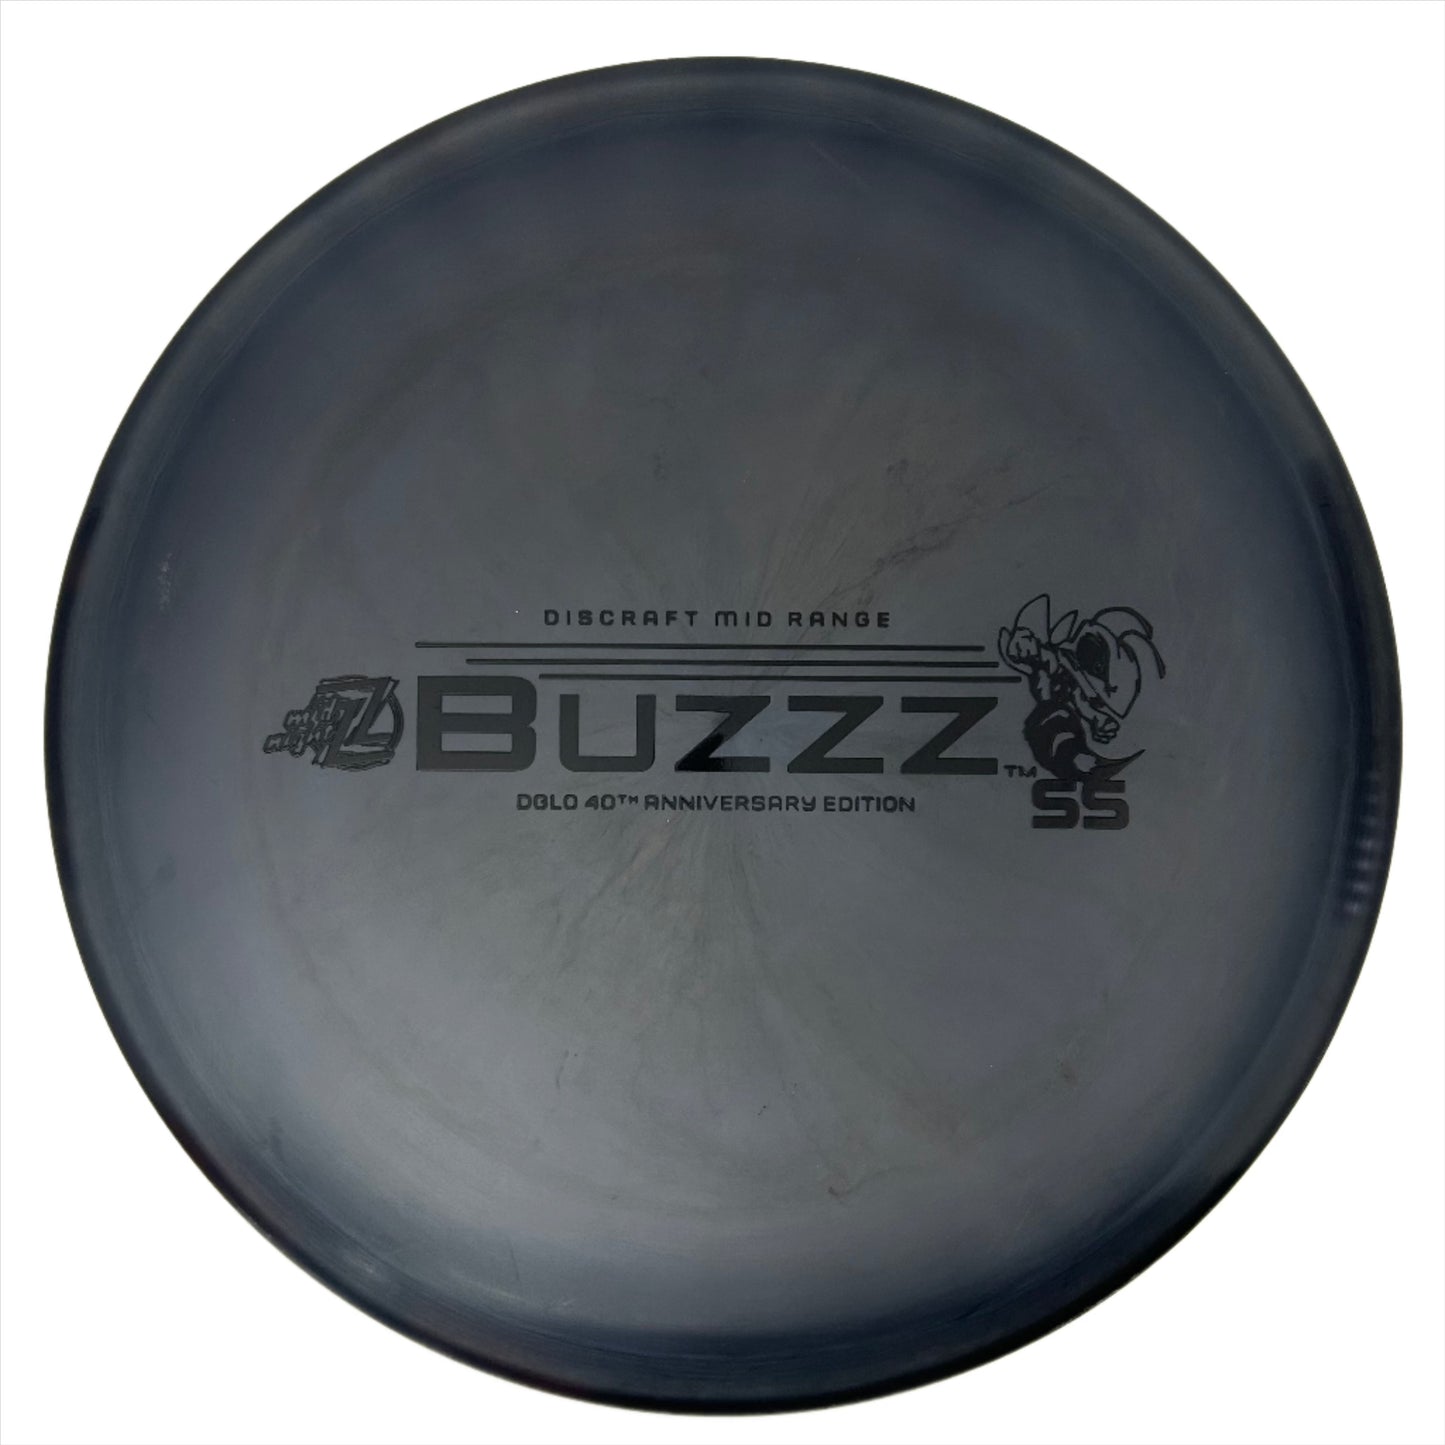 DGLO 40th Anniversary Wasp Tooled Buzzz SS